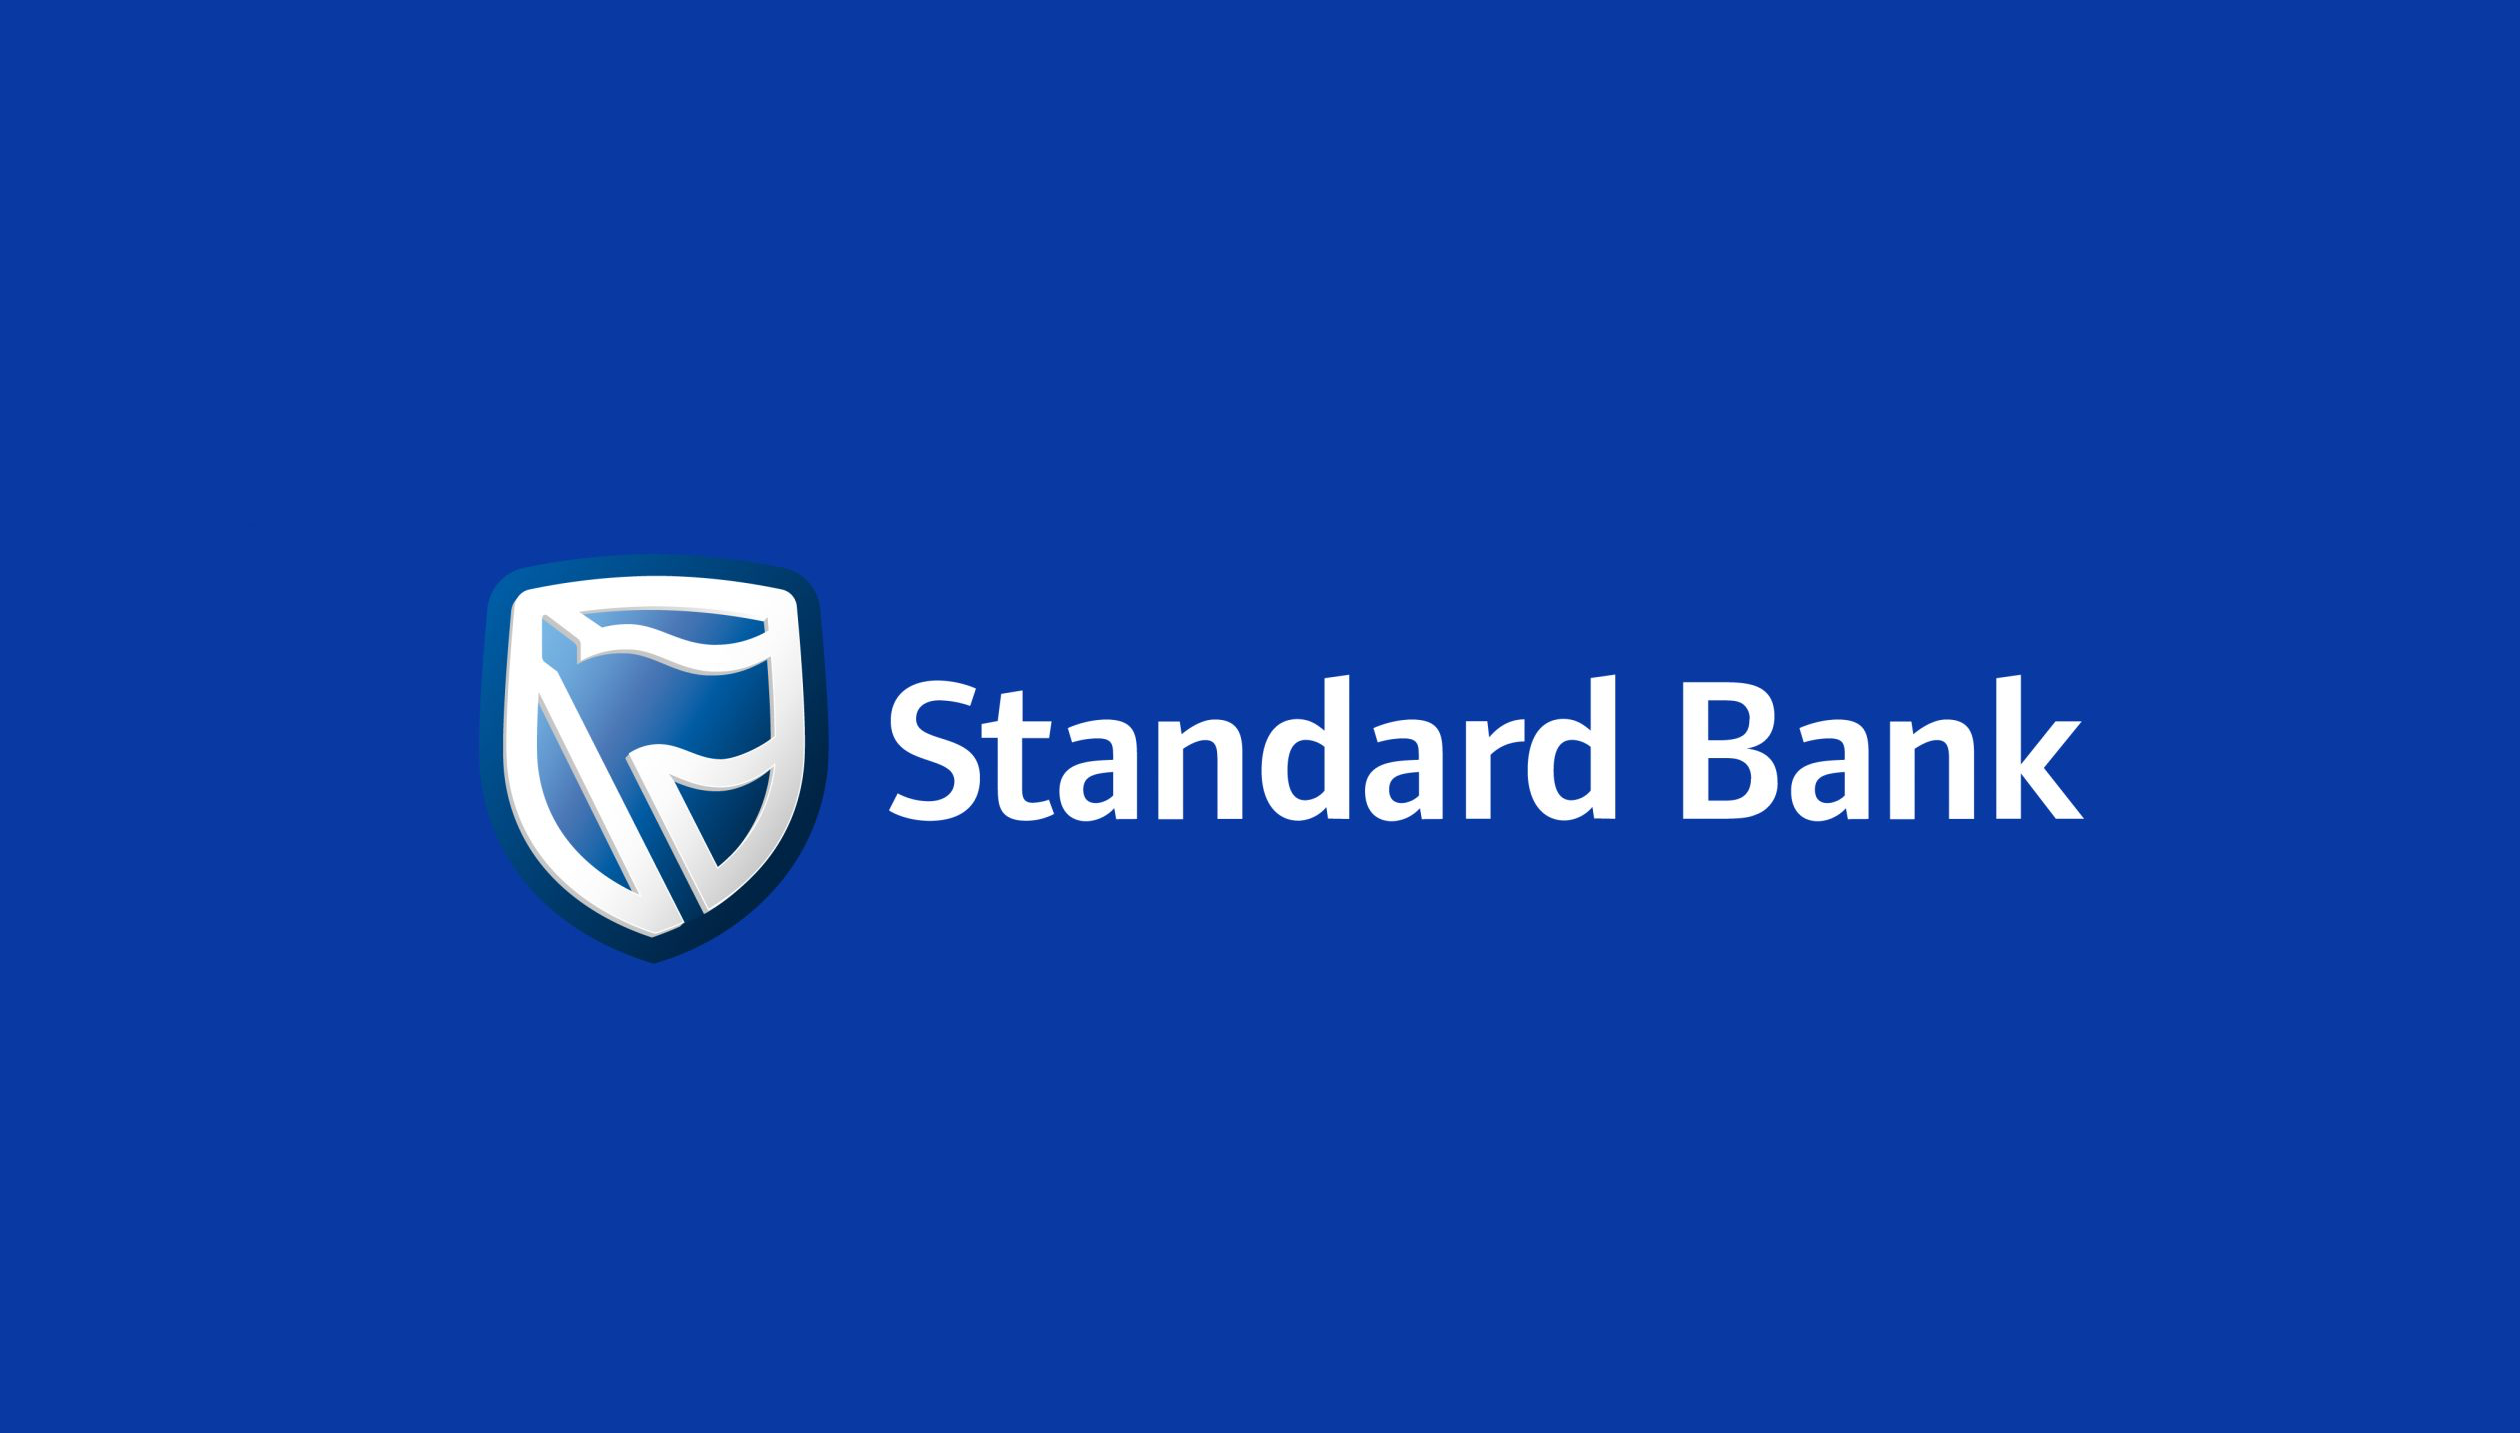 Standard Bank: positive JAWS and a strong outlook